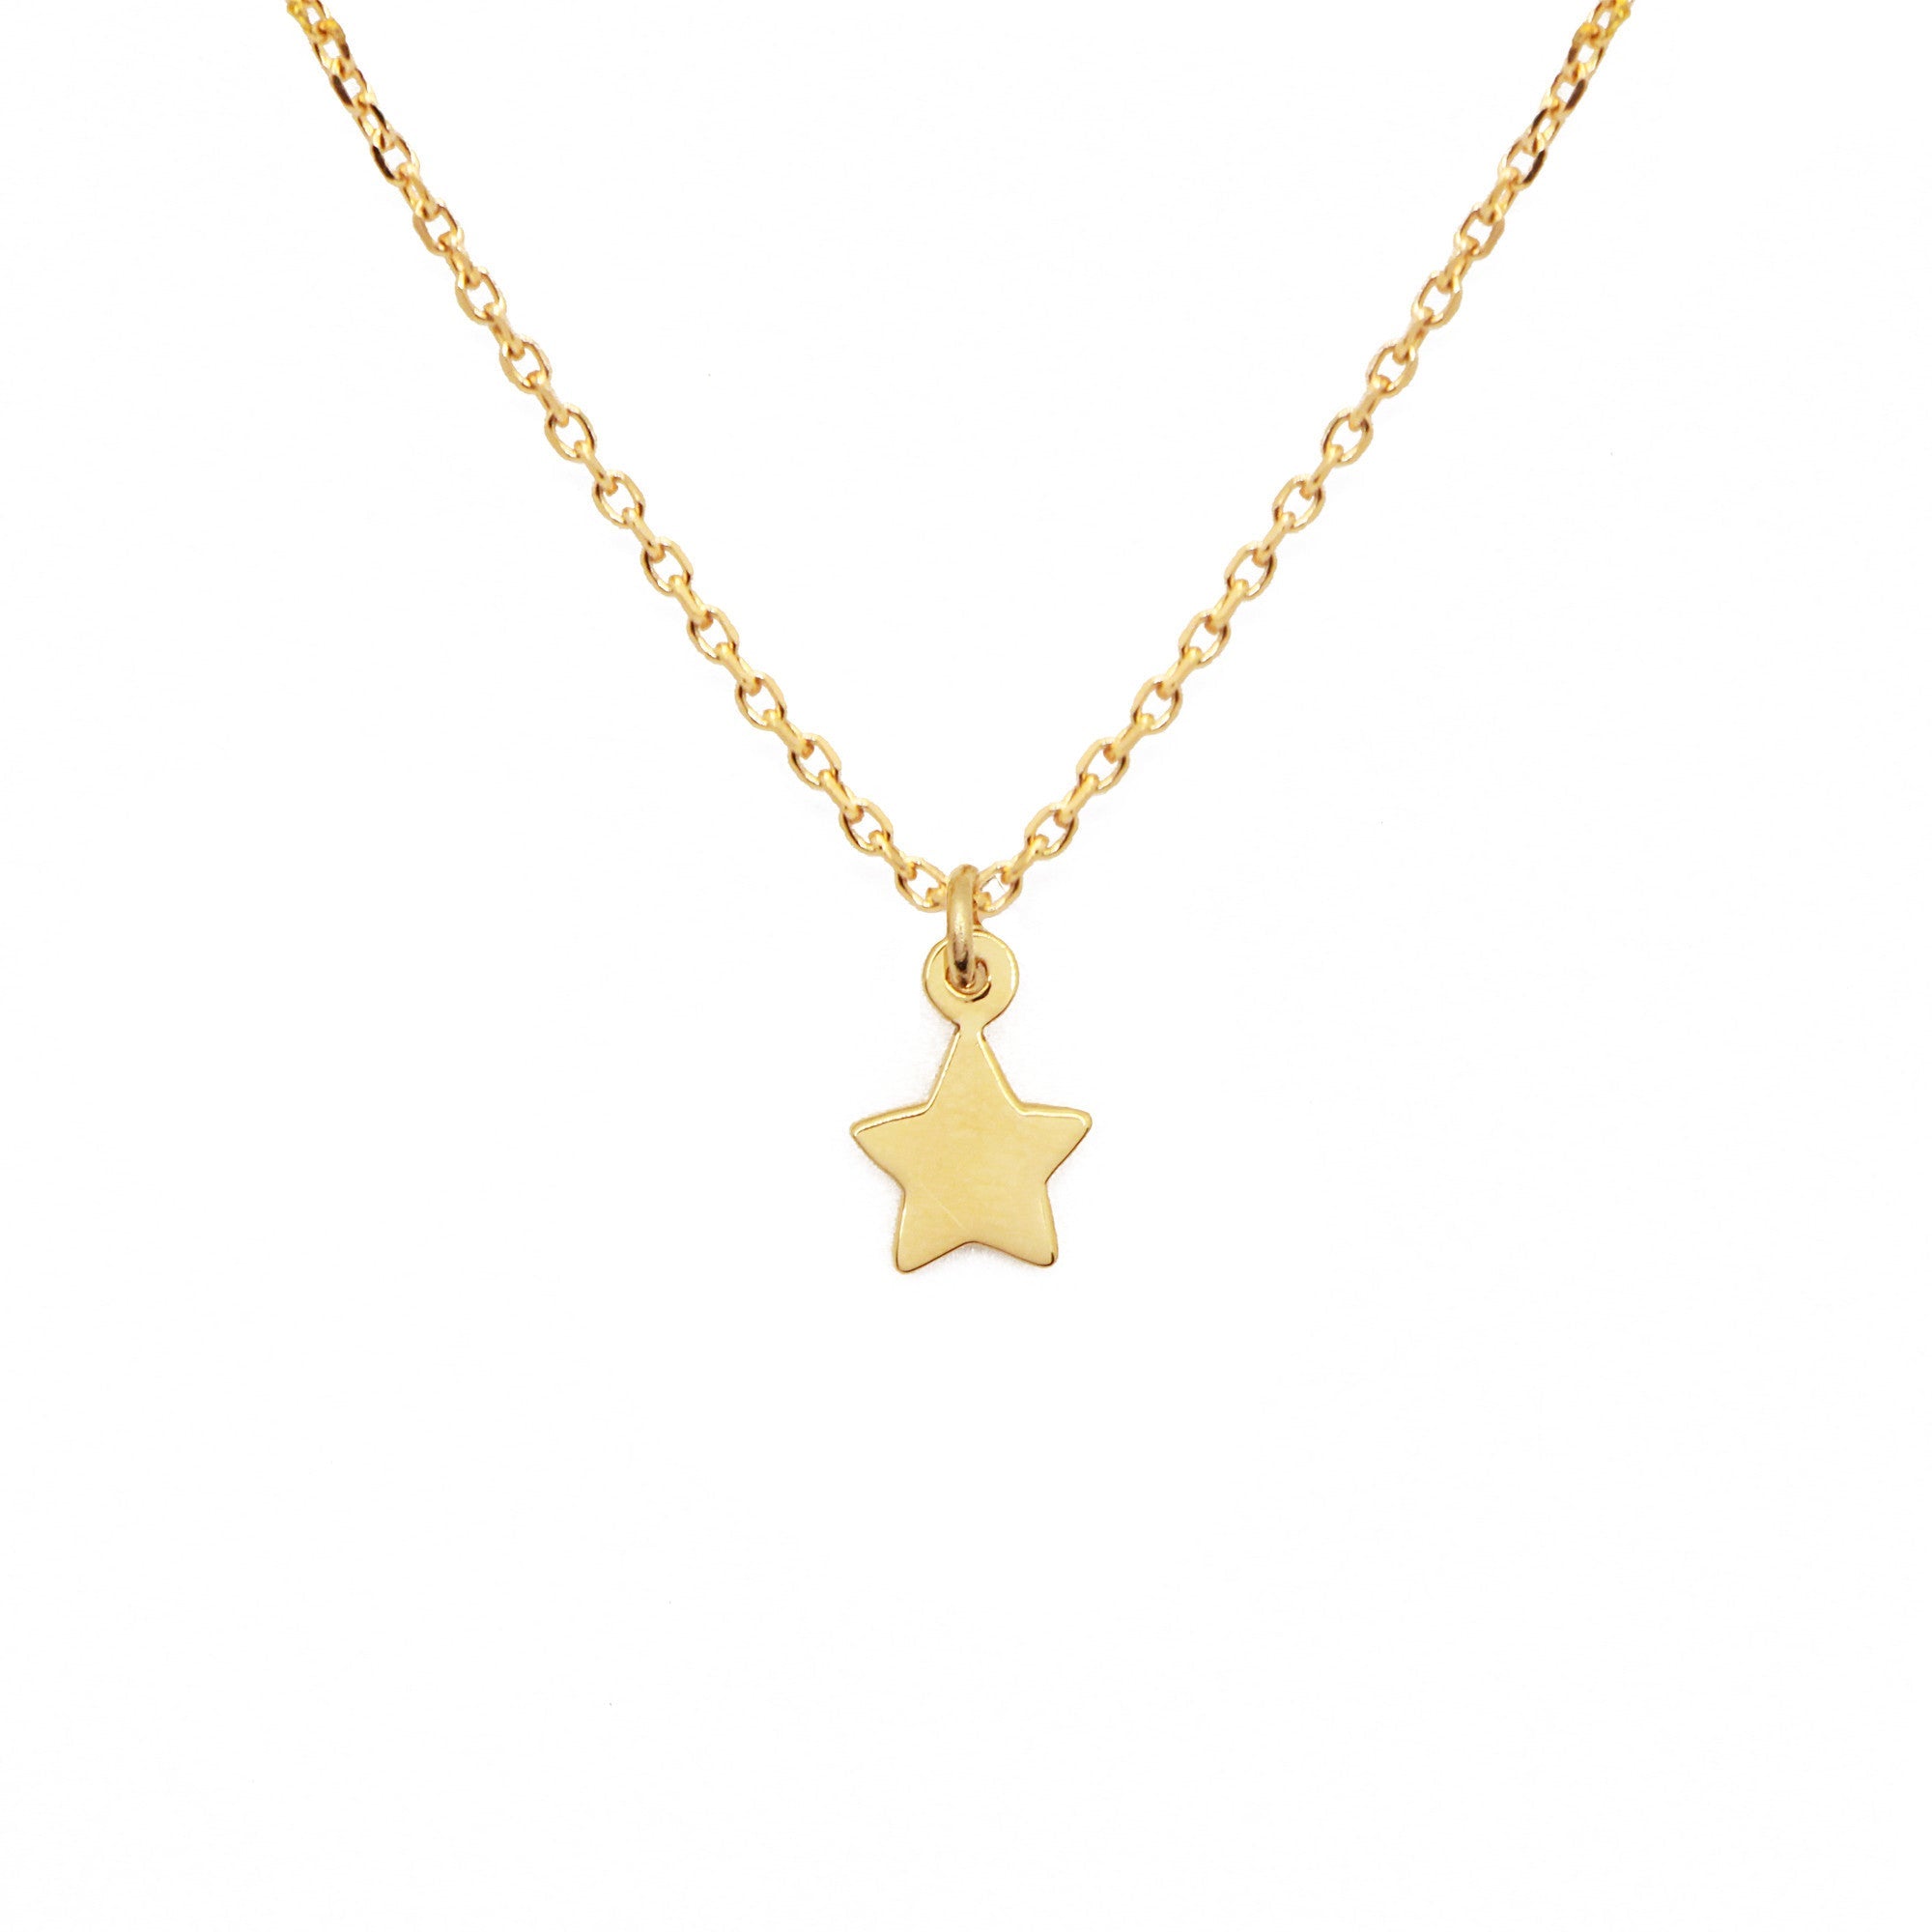 Star charm chain necklace